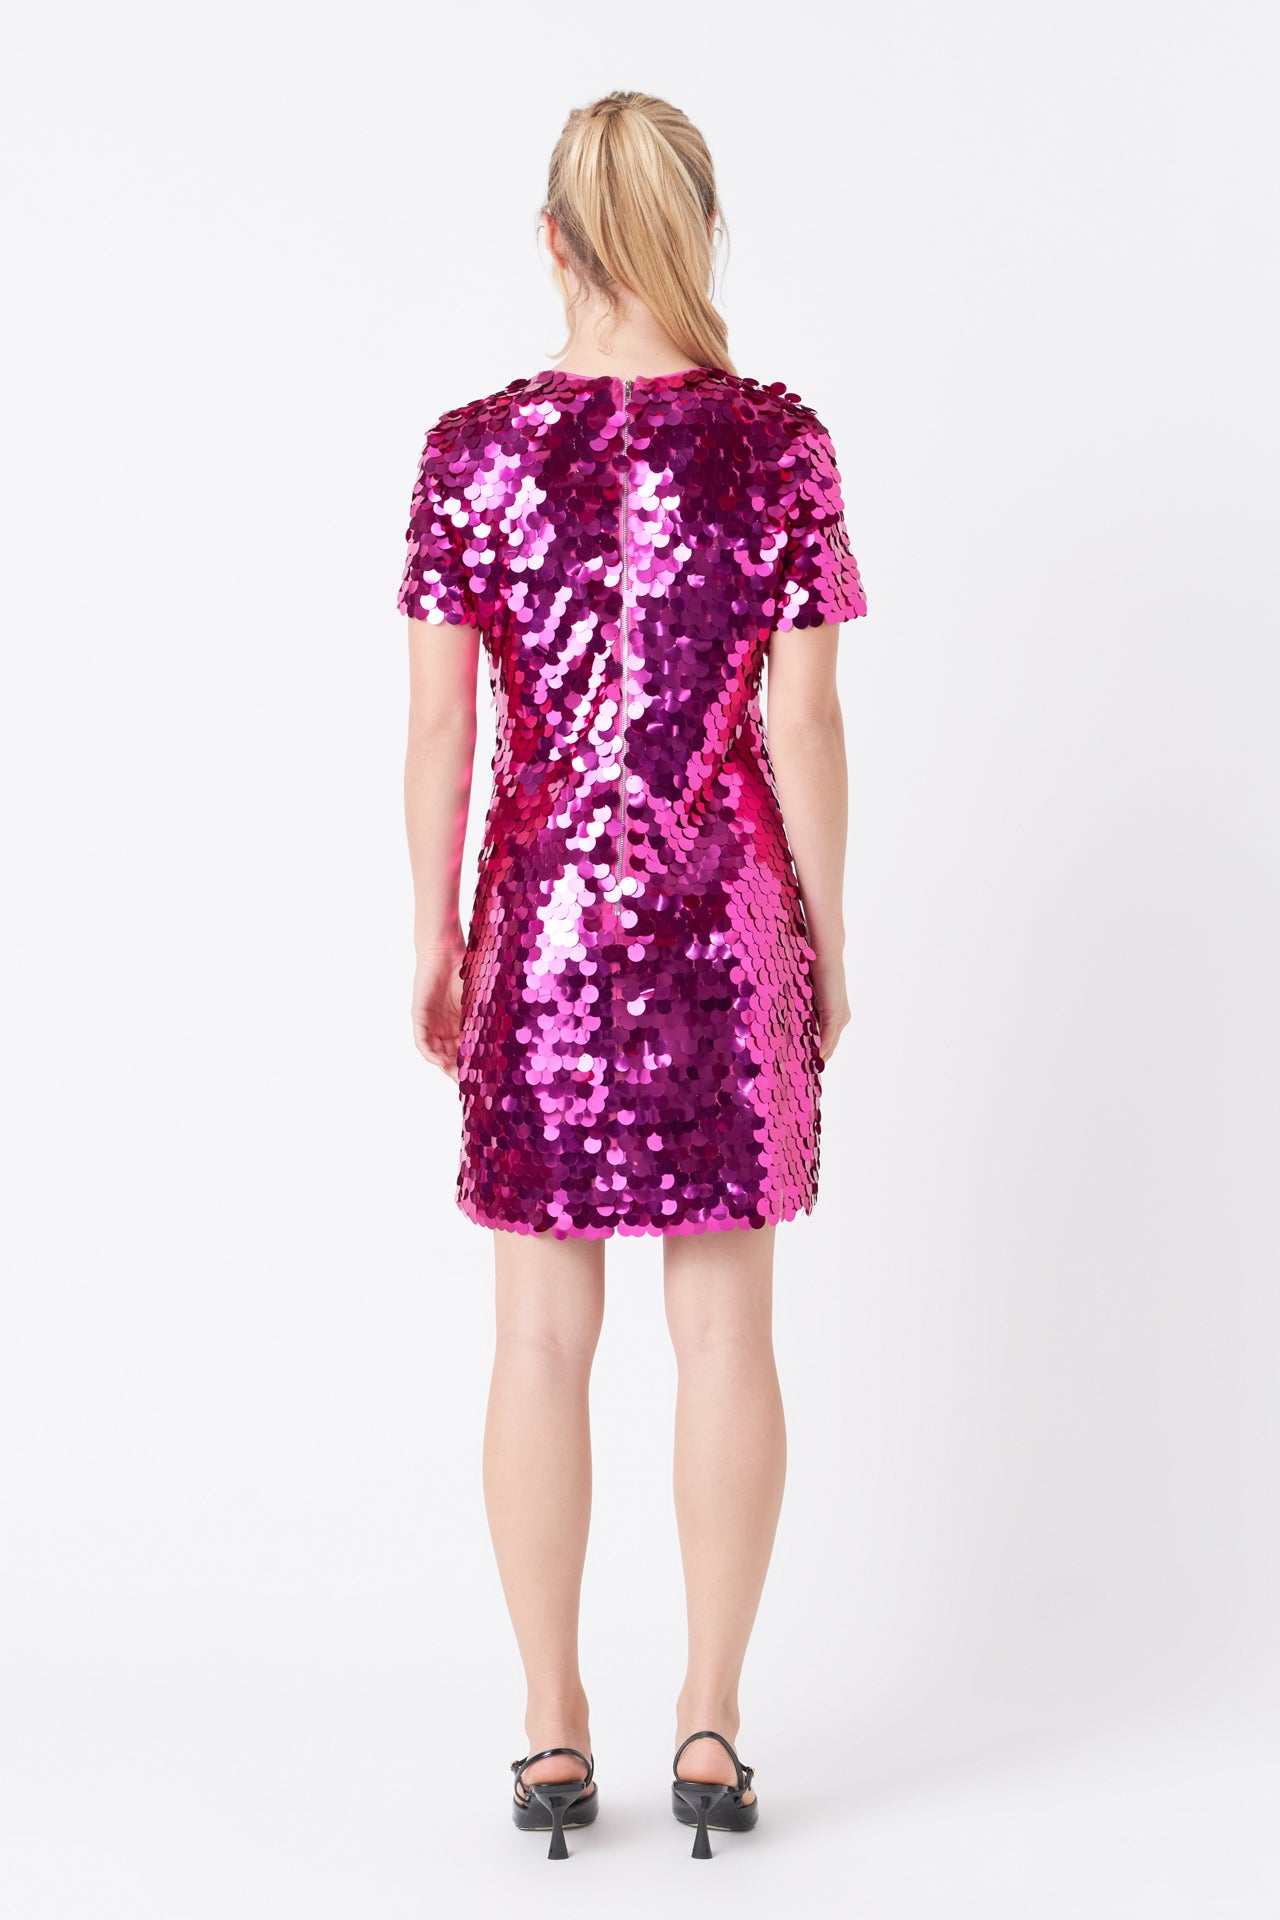 ENDLESS ROSE - Circle Sequins Mini Dress - DRESSES available at Objectrare